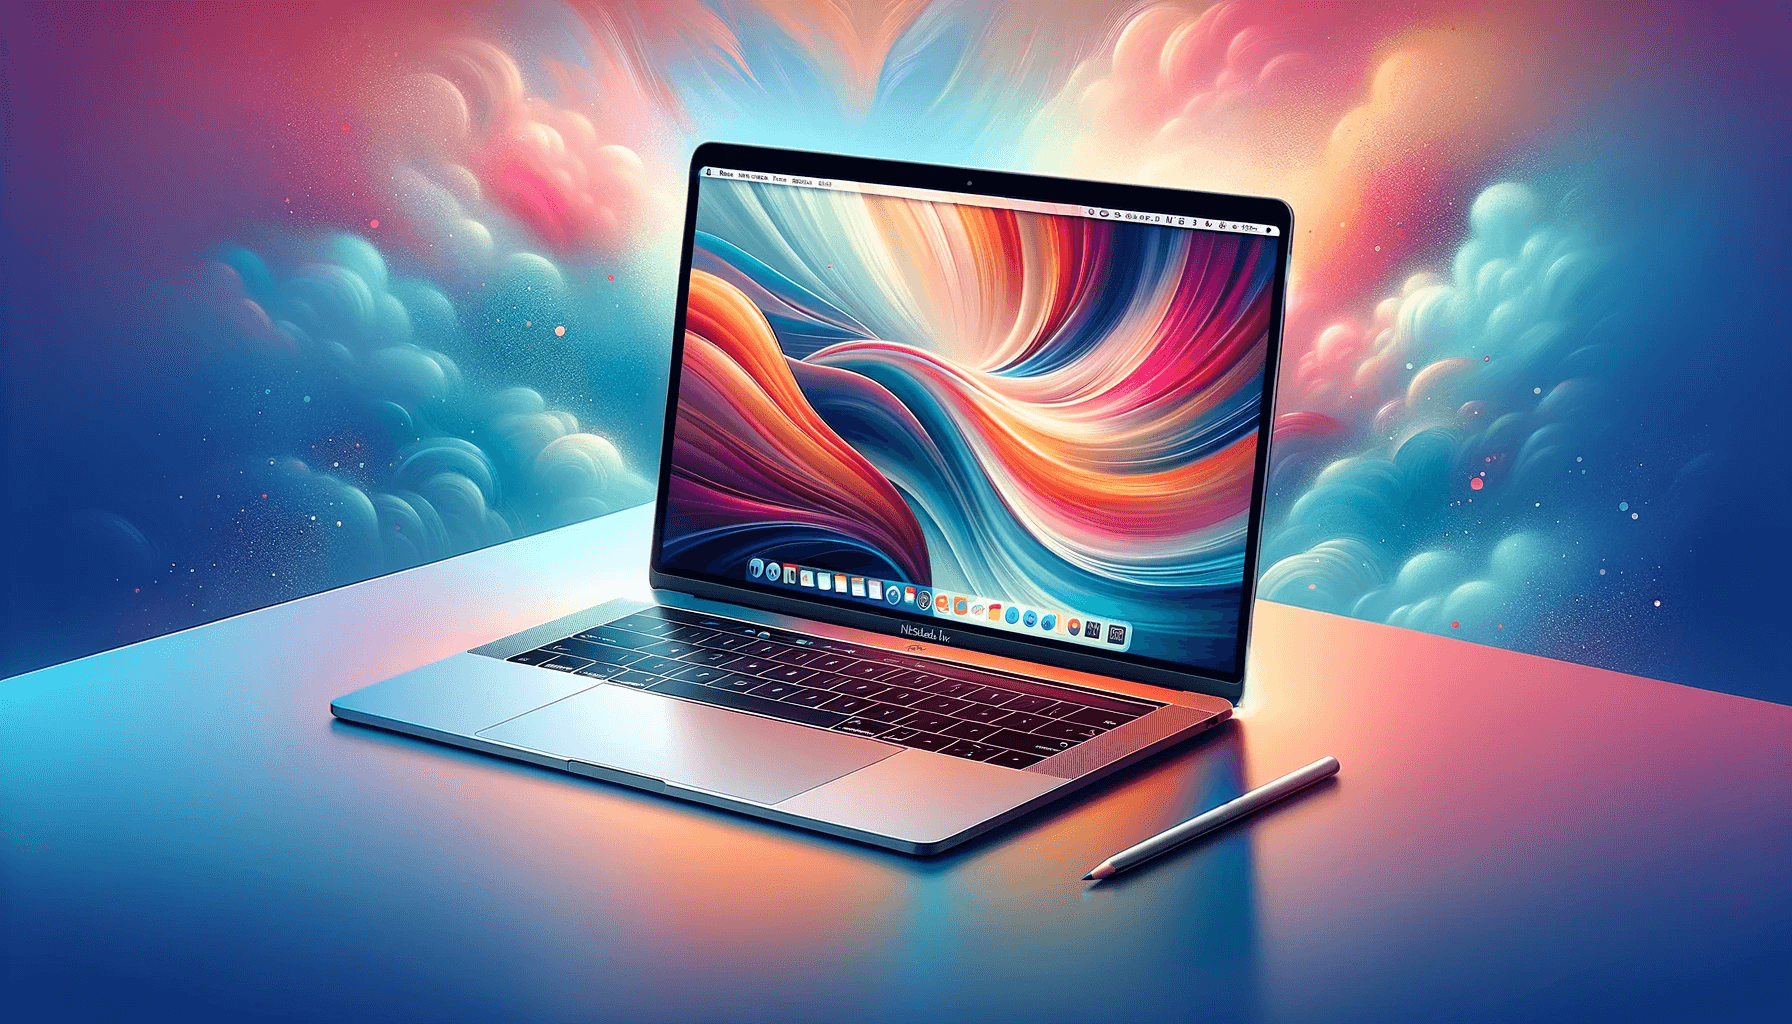 DALL·E 2023 11 17 15.15.52 A stunning digital illustration of a MacBook Air with a beautiful background featuring soft colors. The MacBook Air is depicted open on a sleek desk